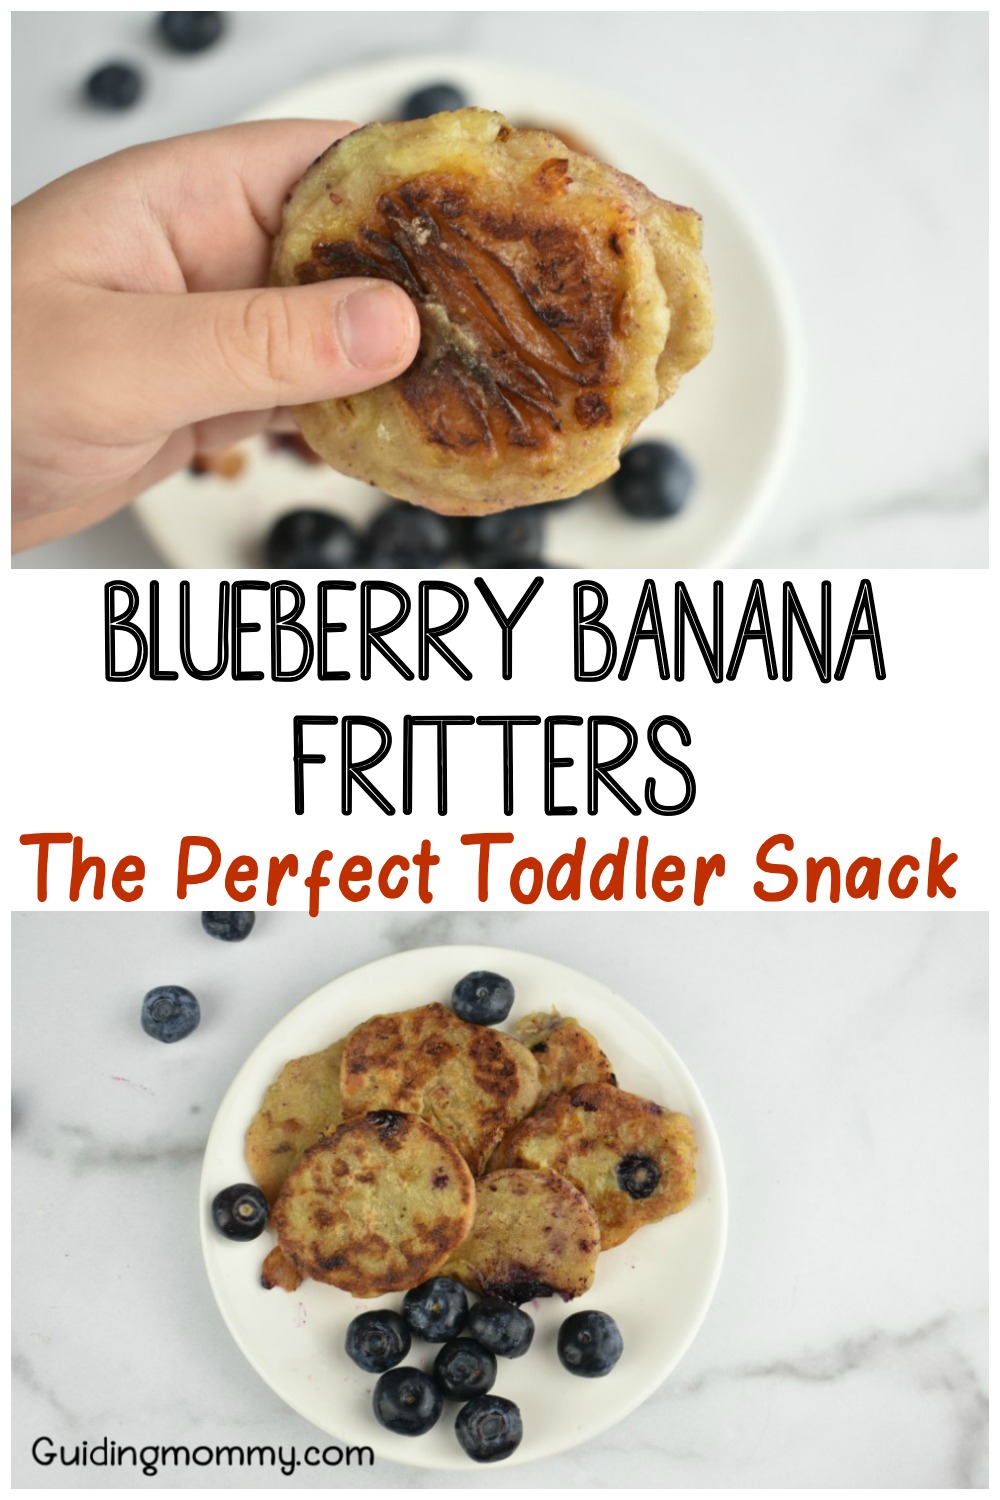 Blueberry Banana Fritters- The Perfect Toddler Snack